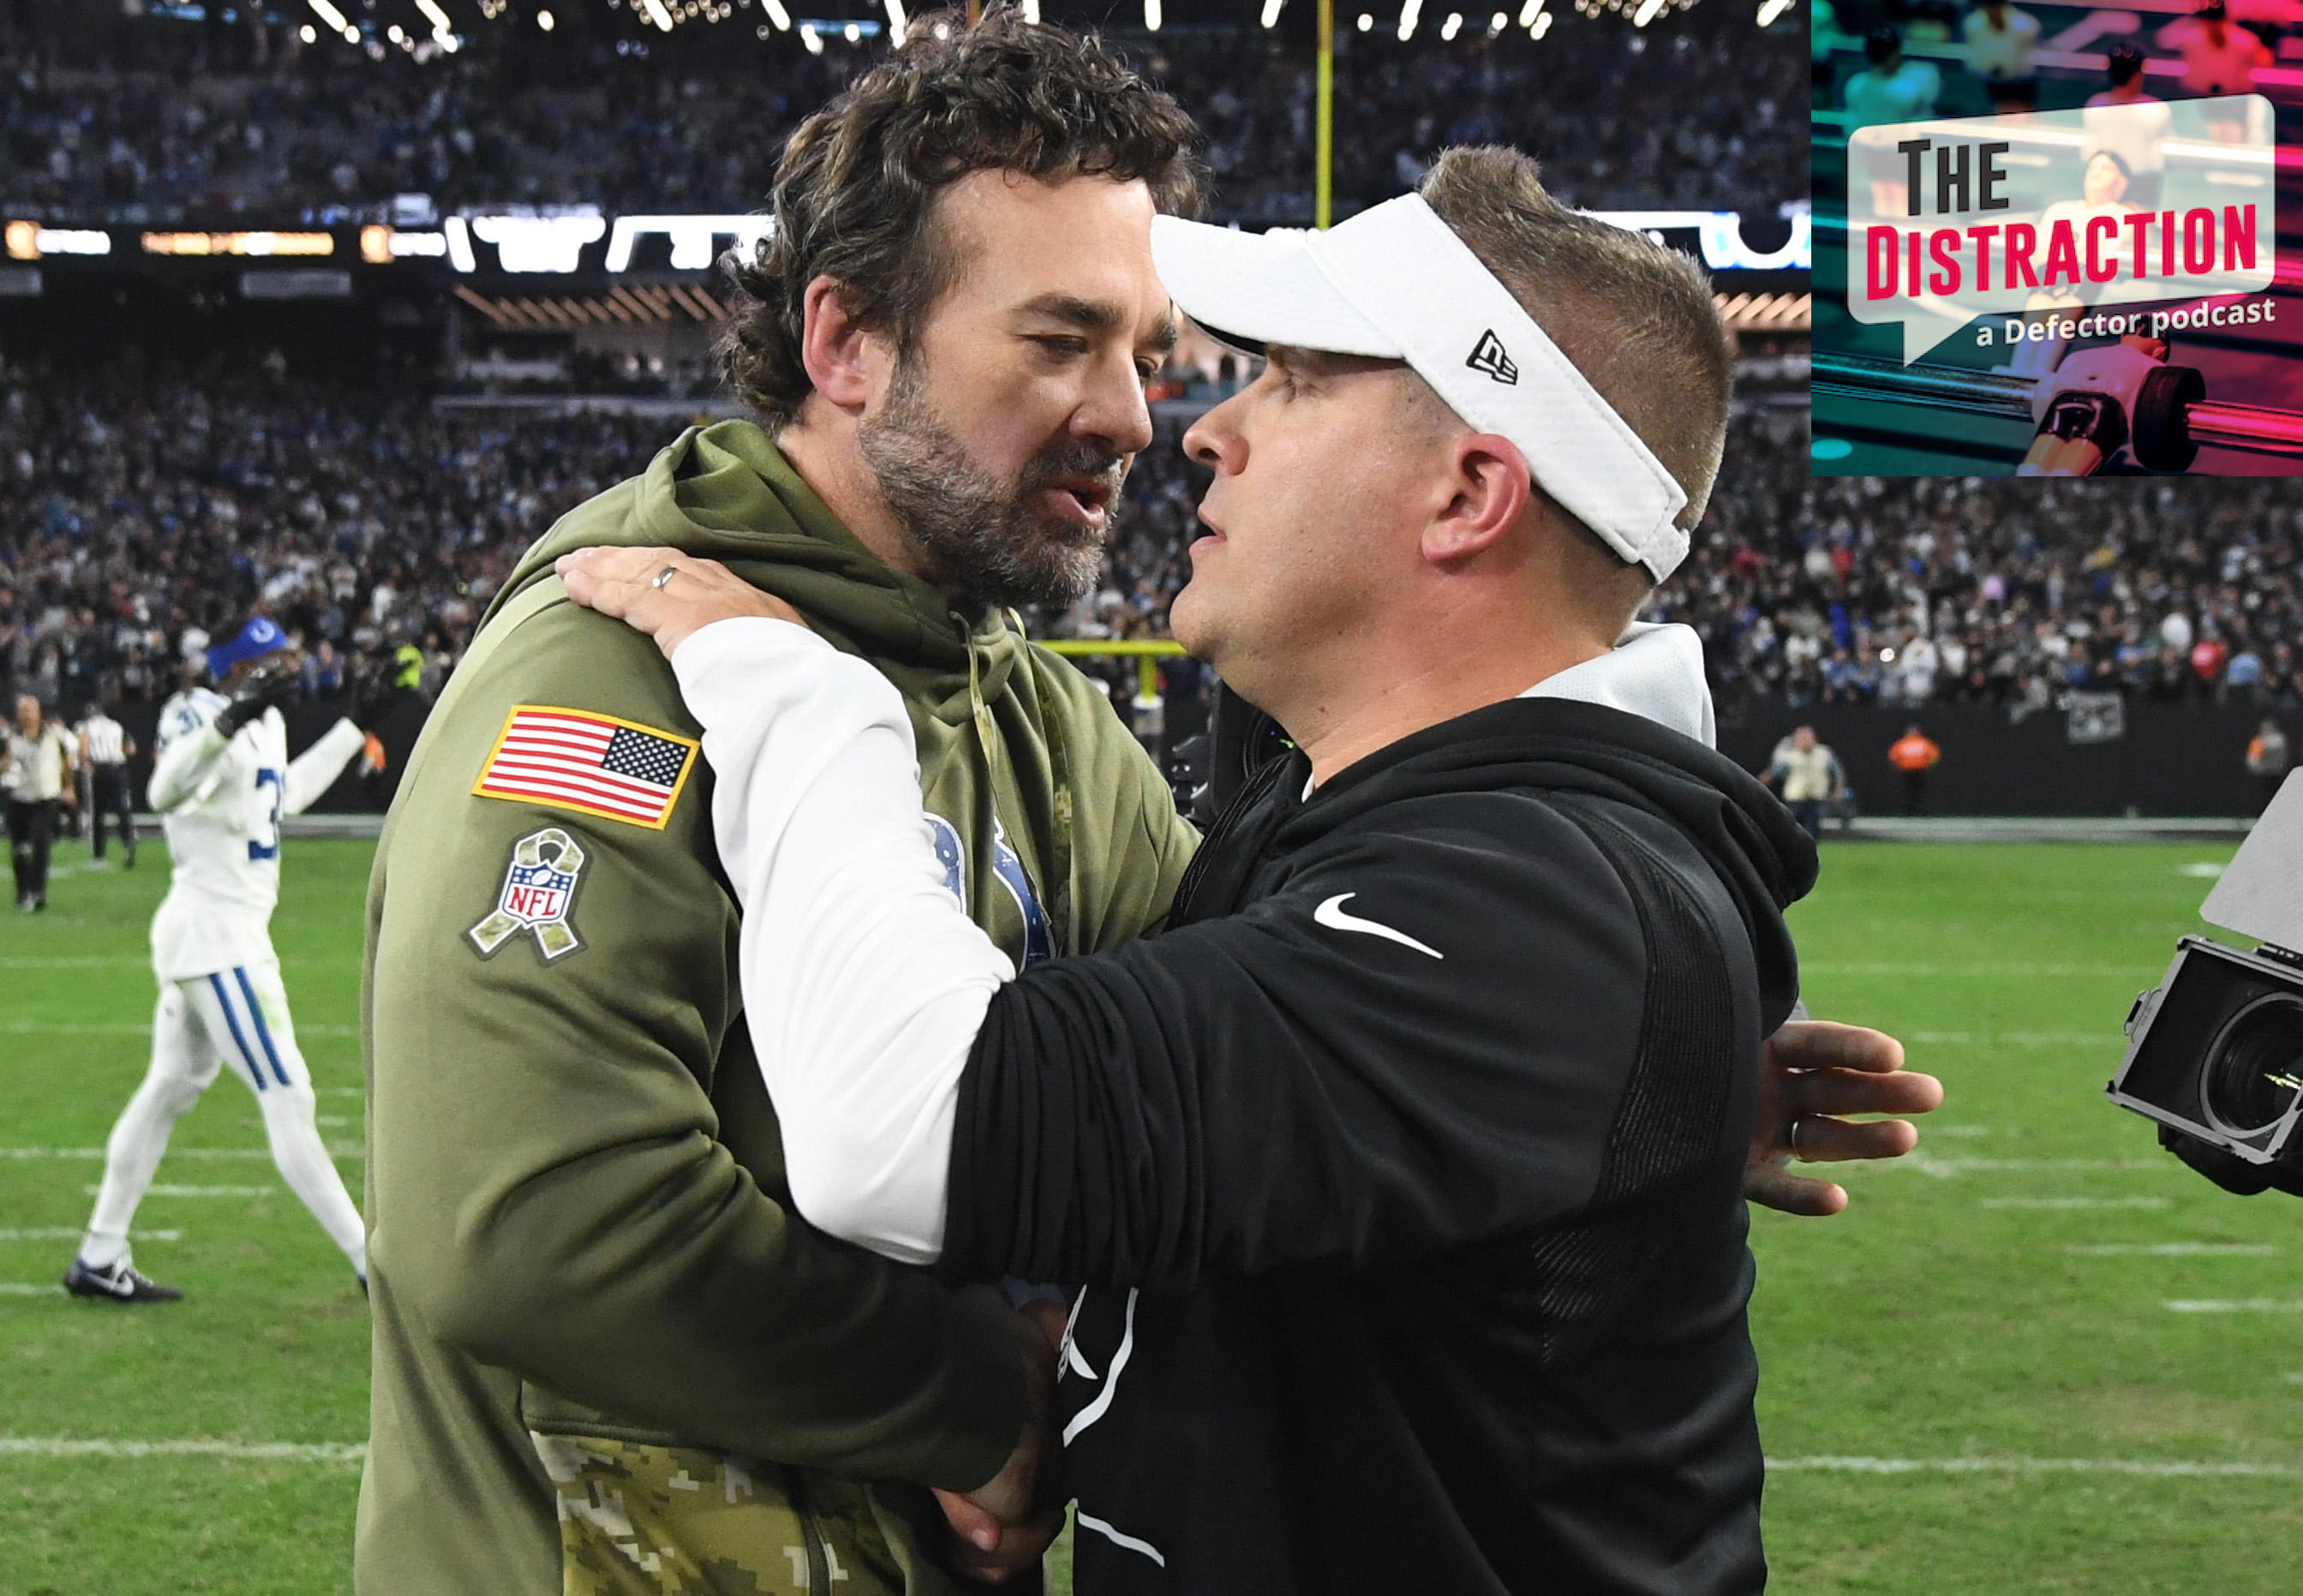 Colts coach Jeff Saturday and Raiders coach Josh McDaniels congratulate each other after their awful NFL teams played each other.